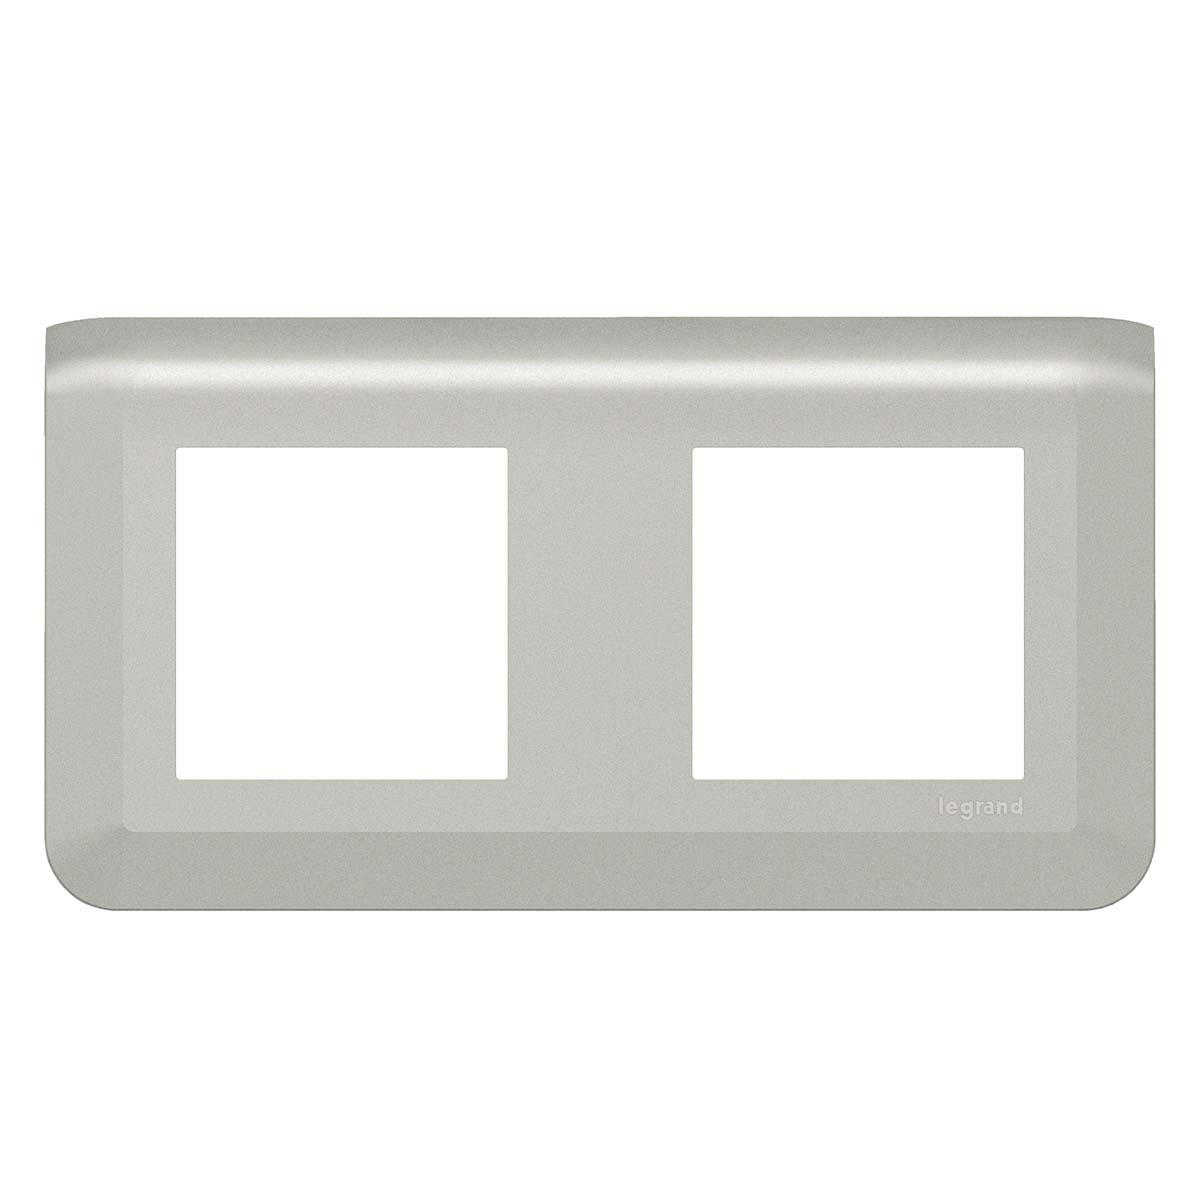 Legrand 2 Light Switch Cover